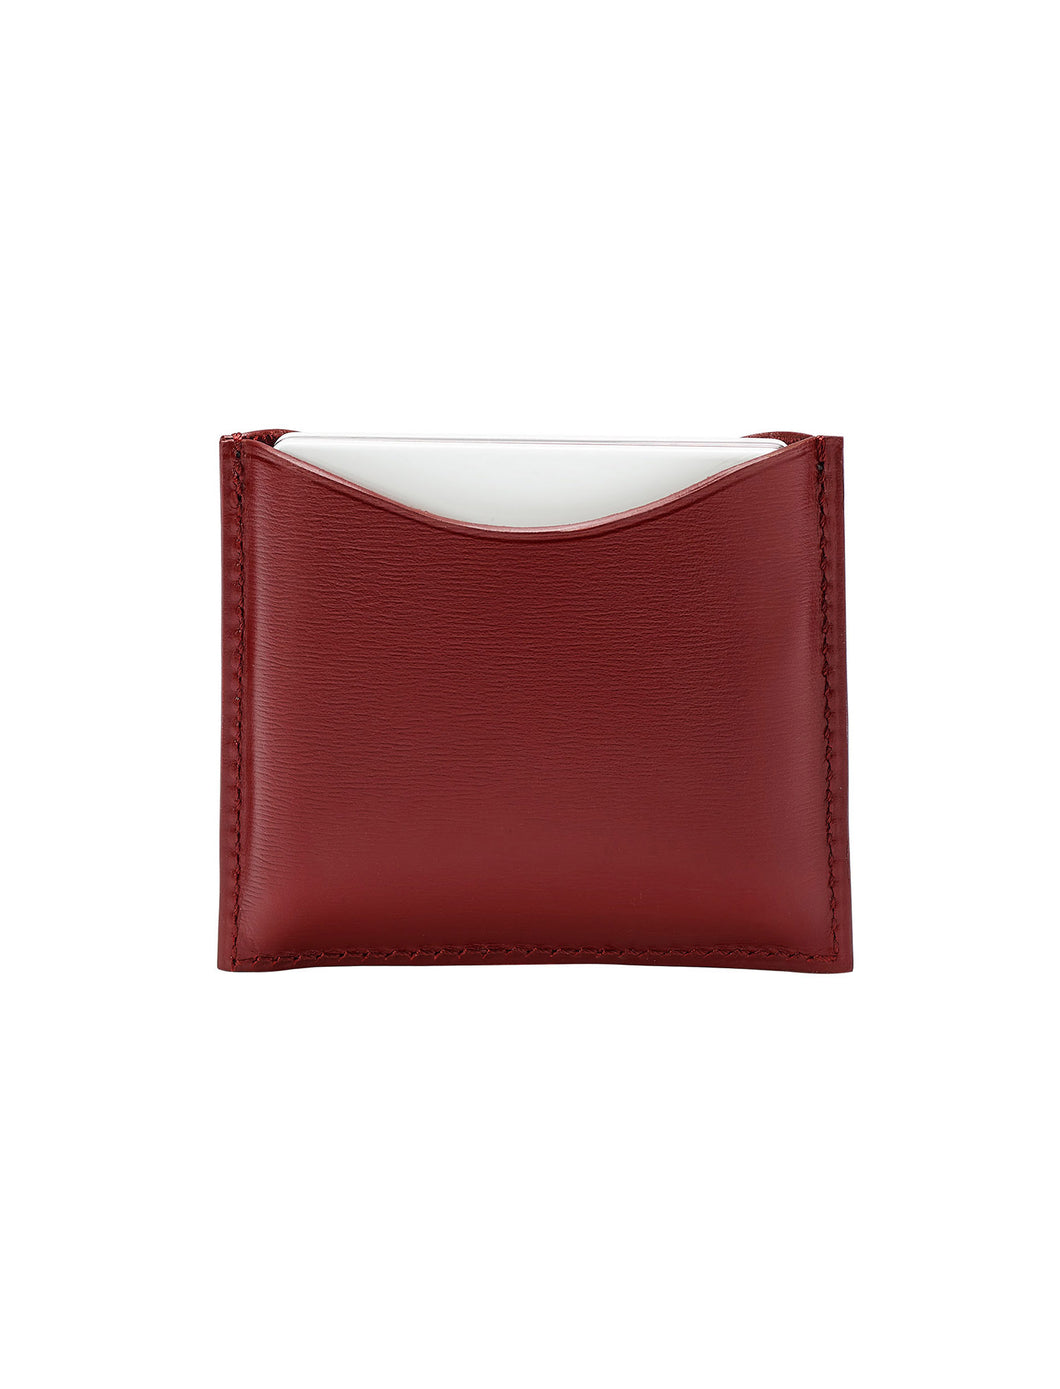 Chocolate Fine Leather Refillable Compact Case